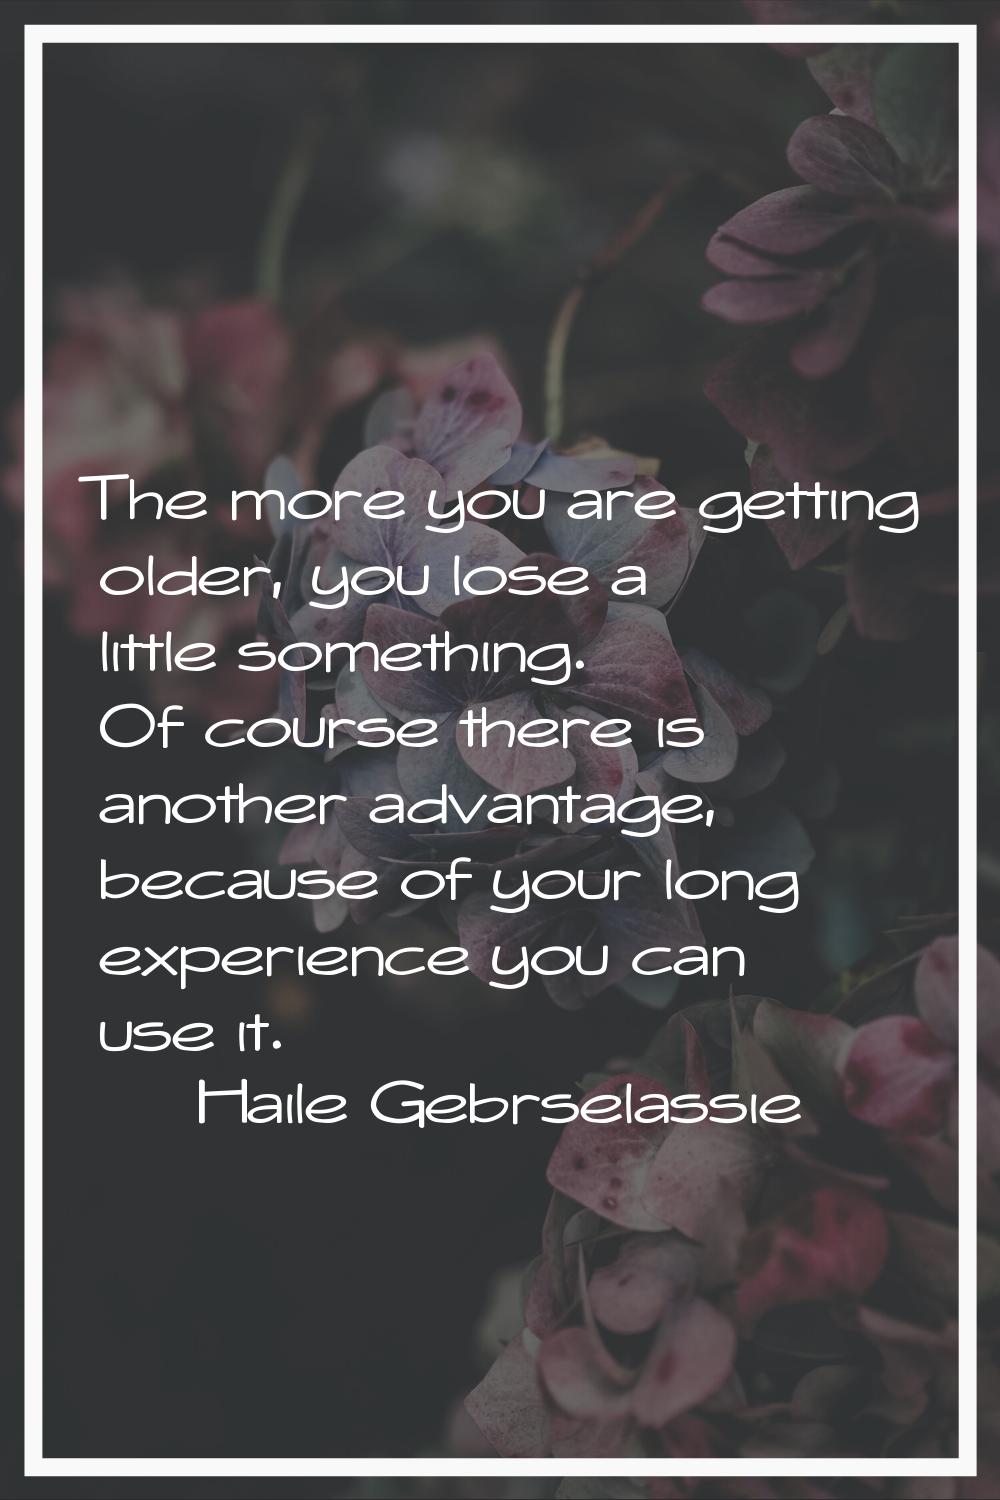 The more you are getting older, you lose a little something. Of course there is another advantage, 